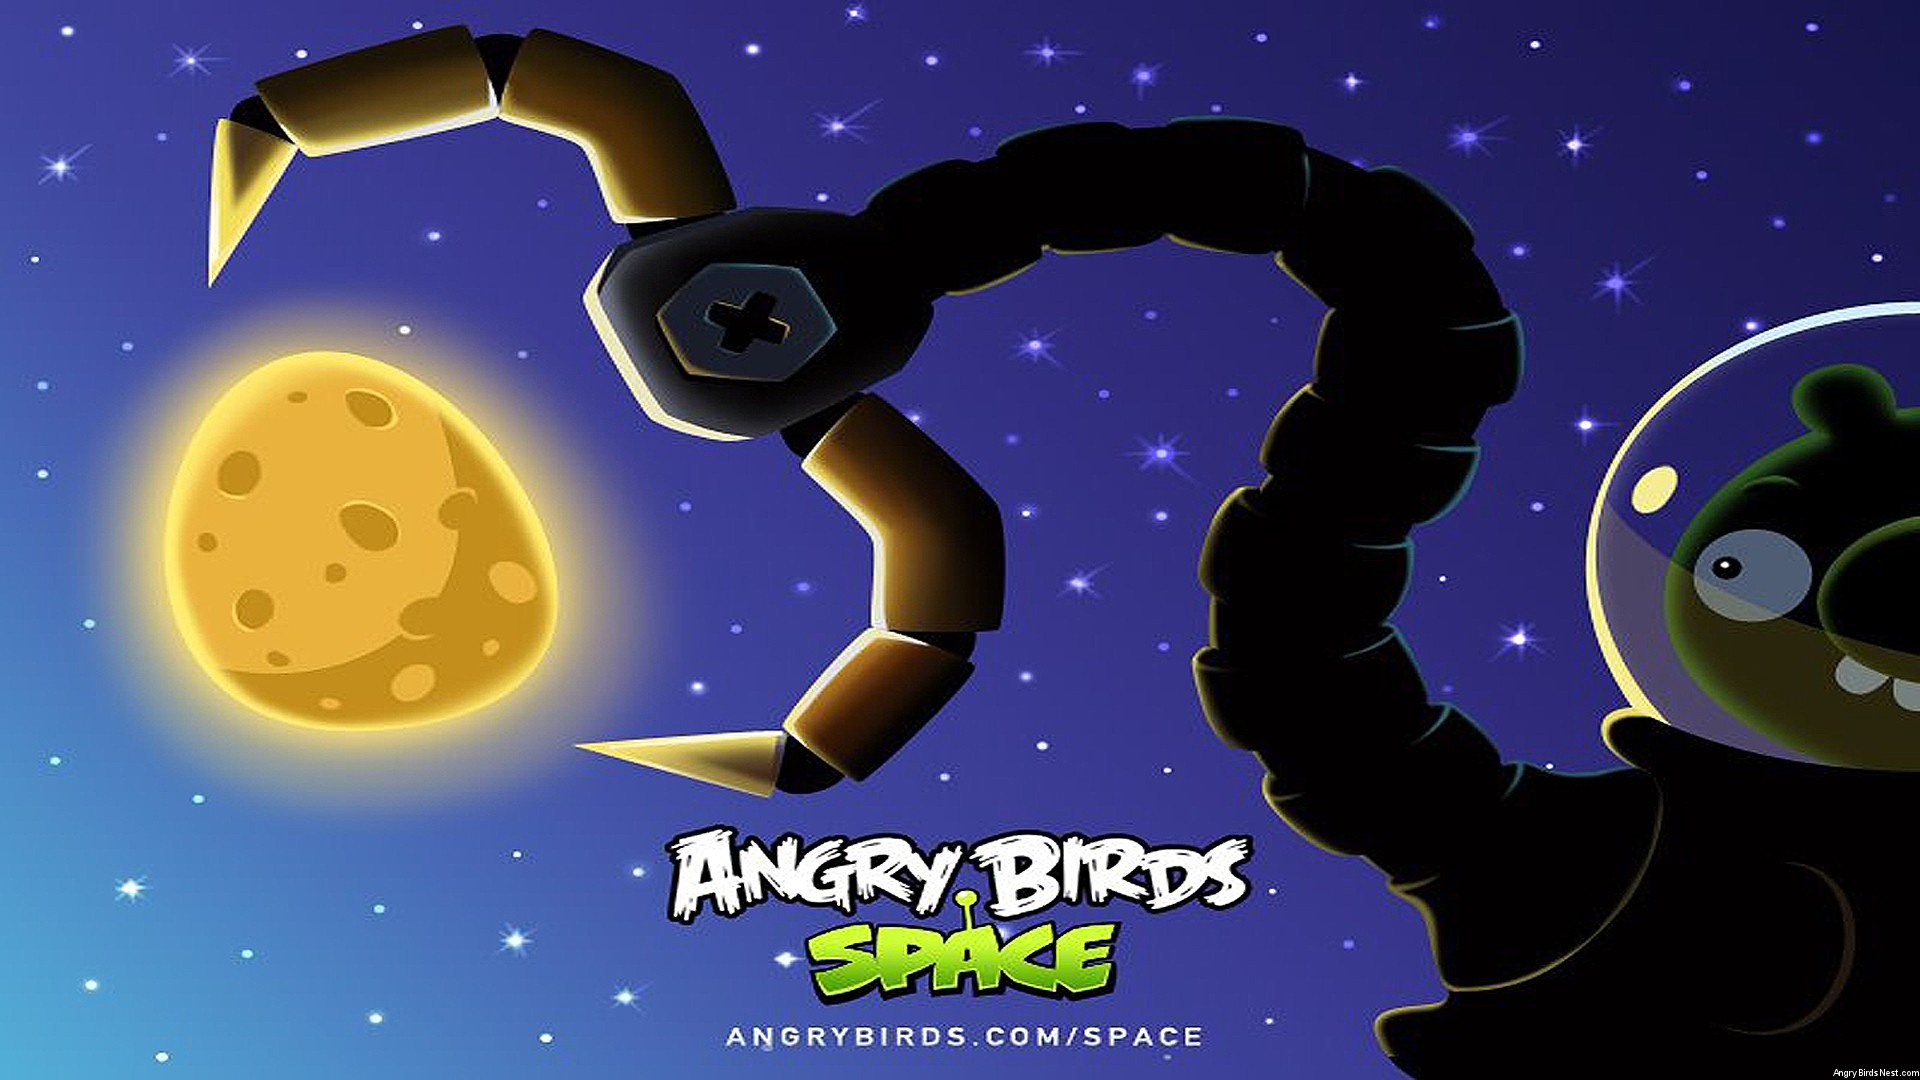 Angry Birds Game Wallpapers #24 - 1920x1080